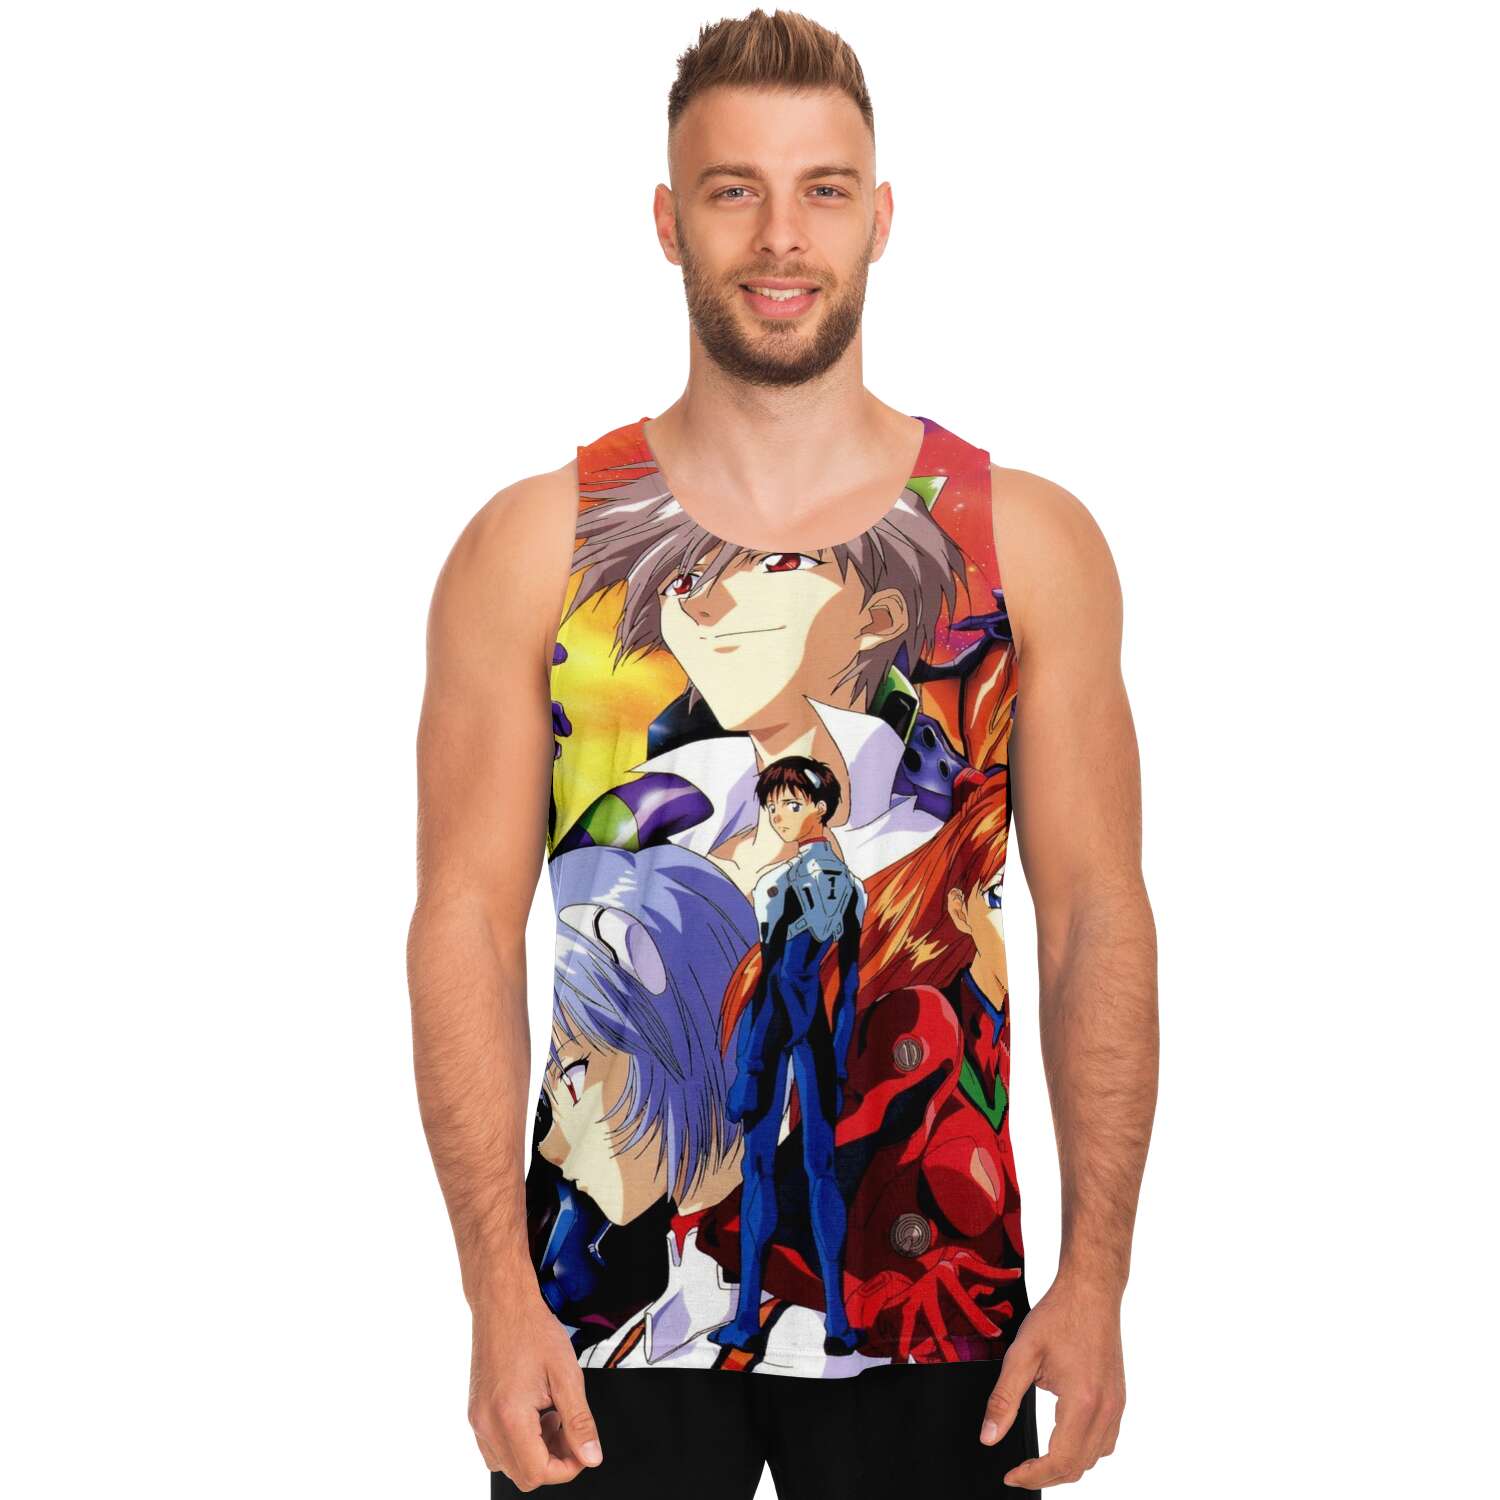 05ececd3574bf8406cf4acc3f4a7c4f3 tankTop male front - Evangelion Shop